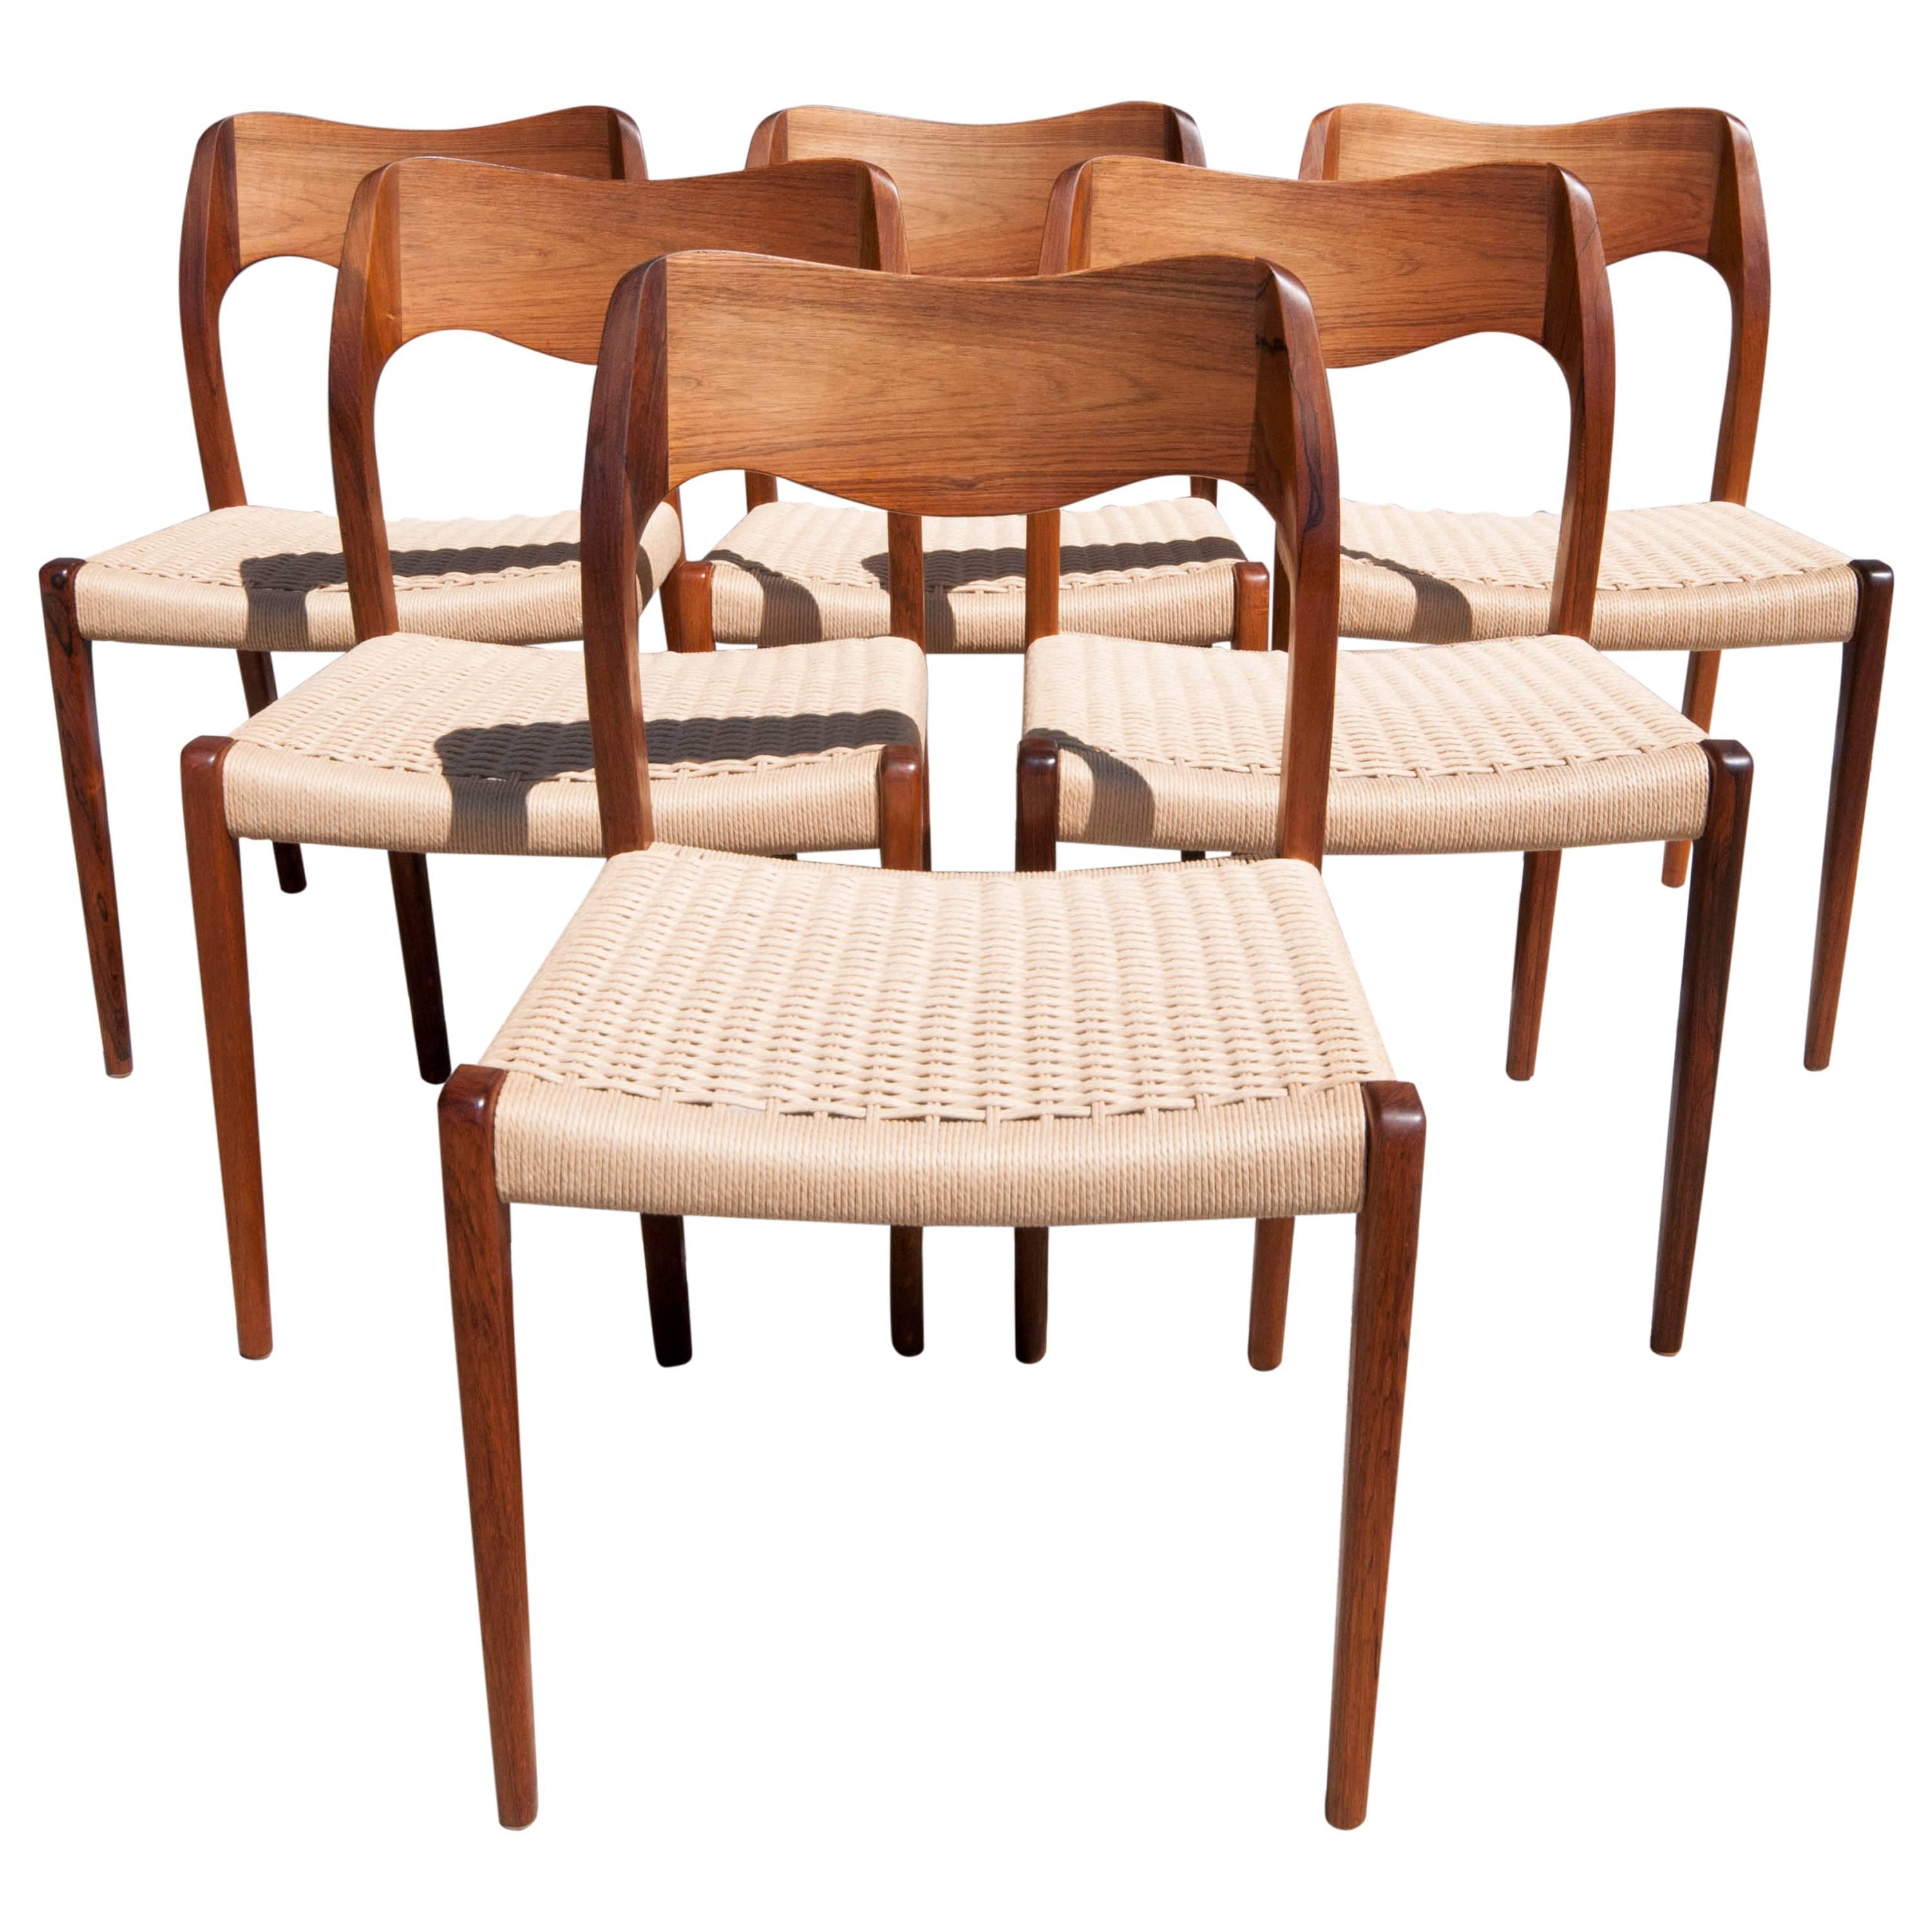 Set of Six N.O. Møller No. 71 Rosewood Dining Chairs